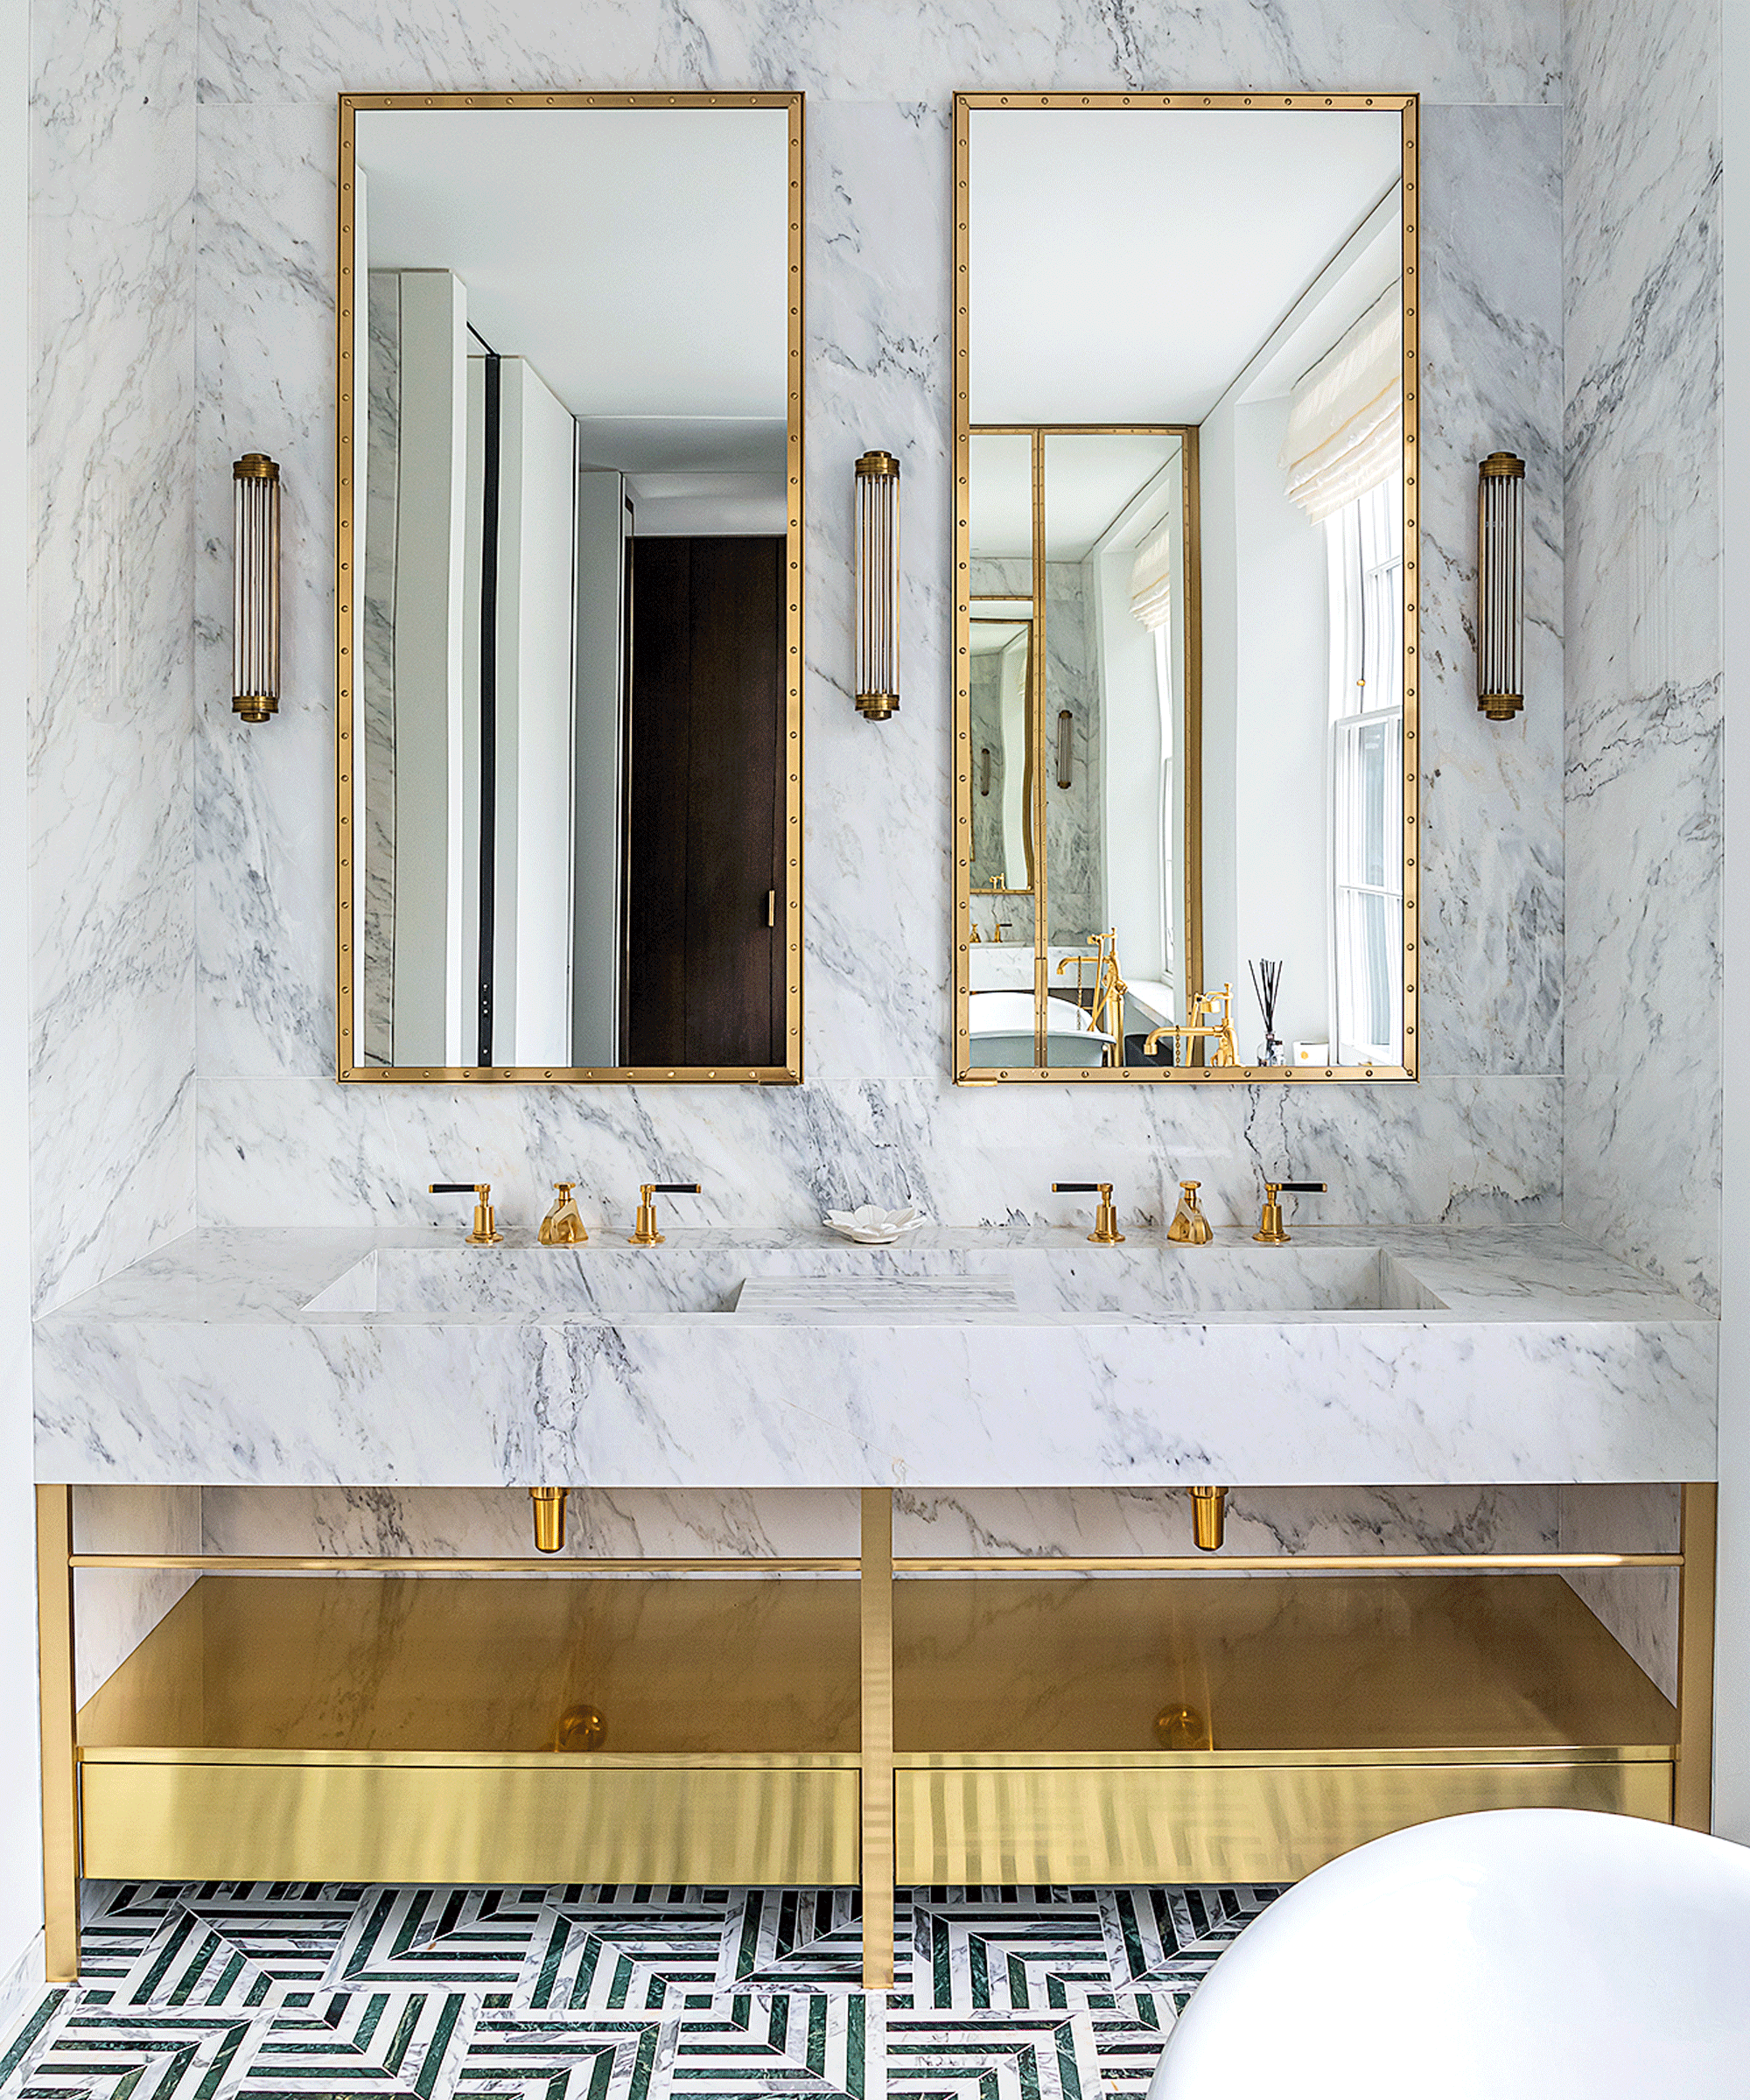 marble double sink in bathroom with gold accents